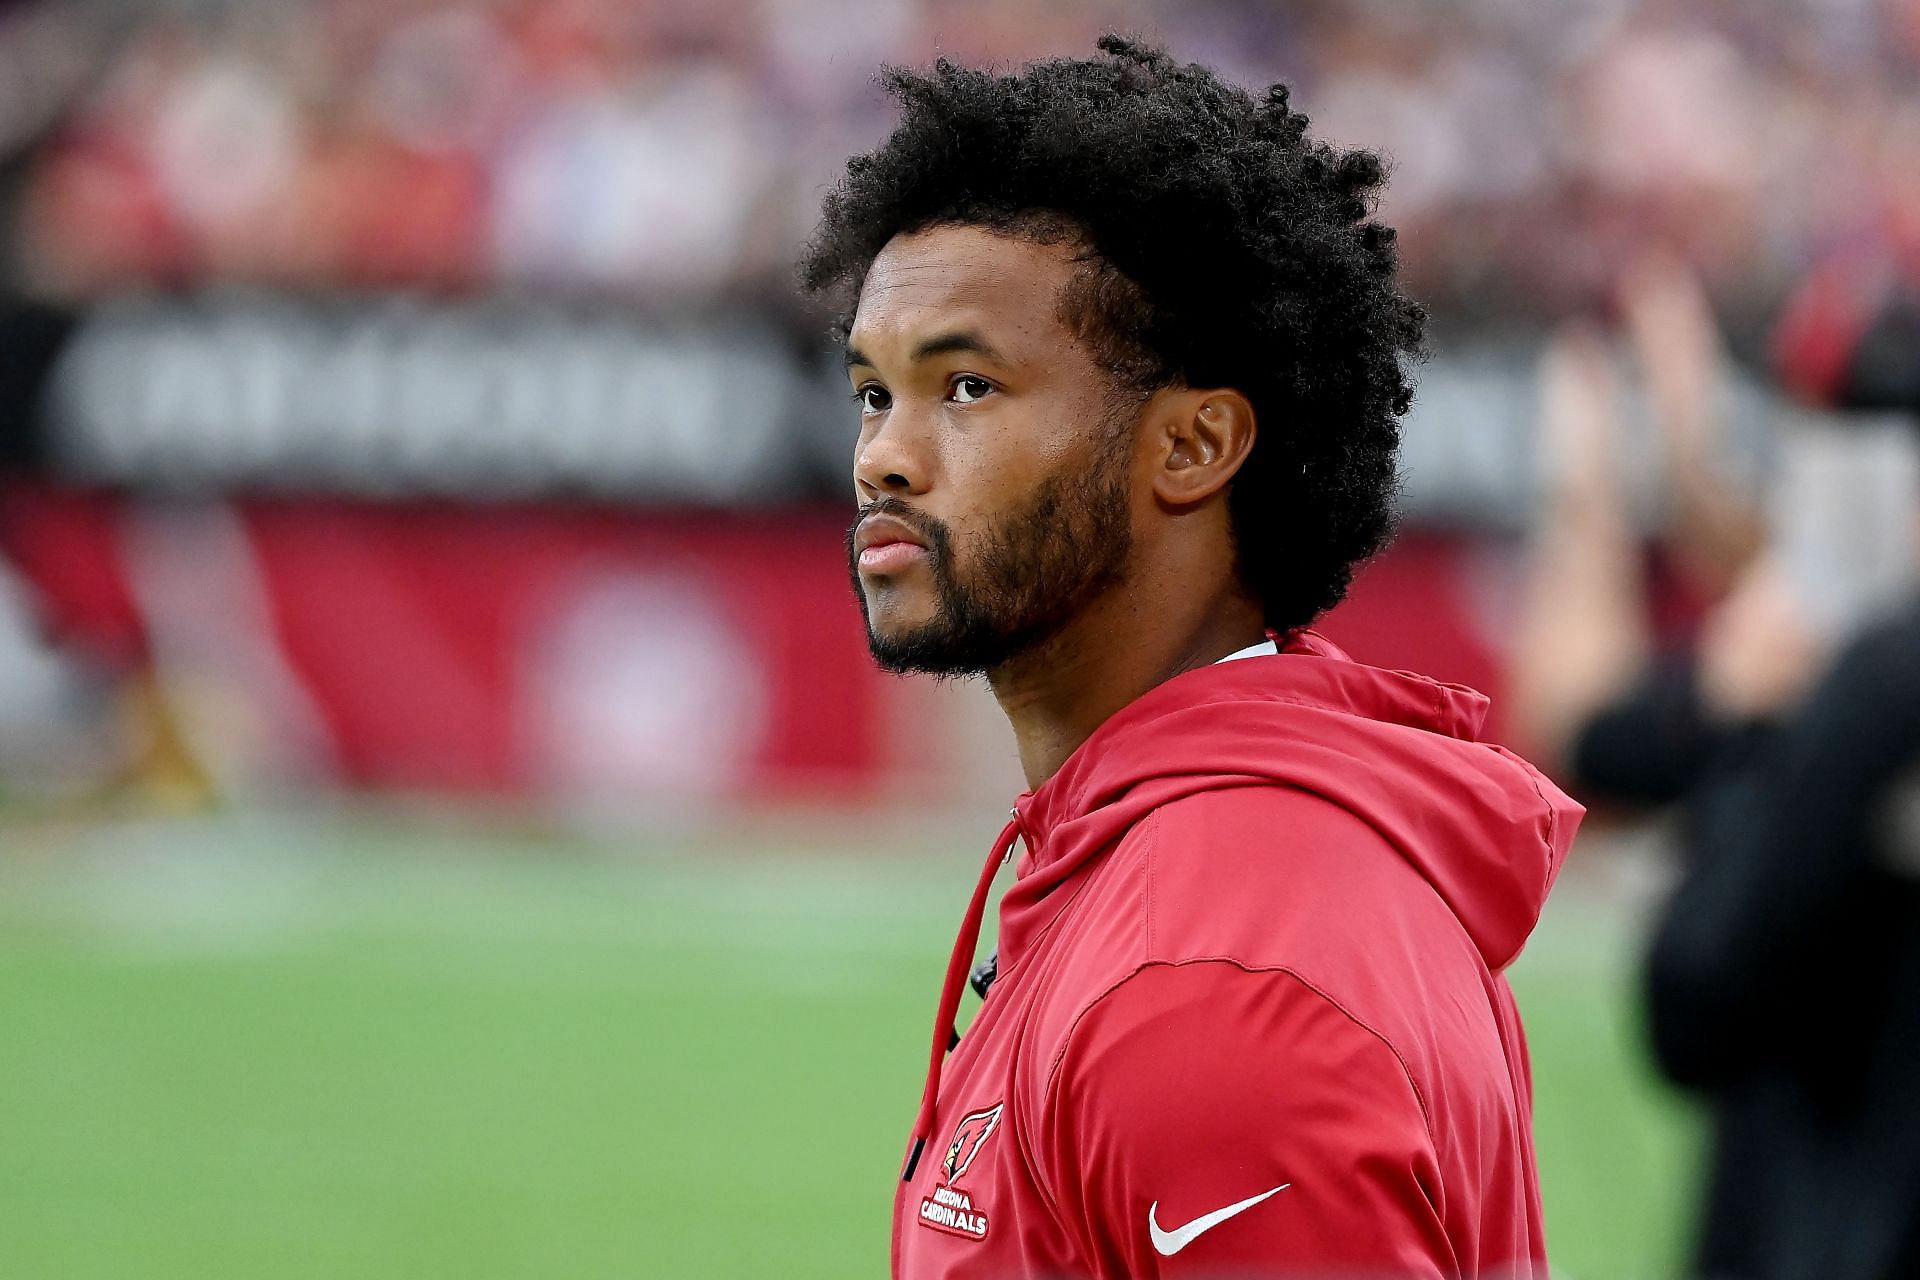 Out of the spotlight, Kyler Murray opens up about his football career